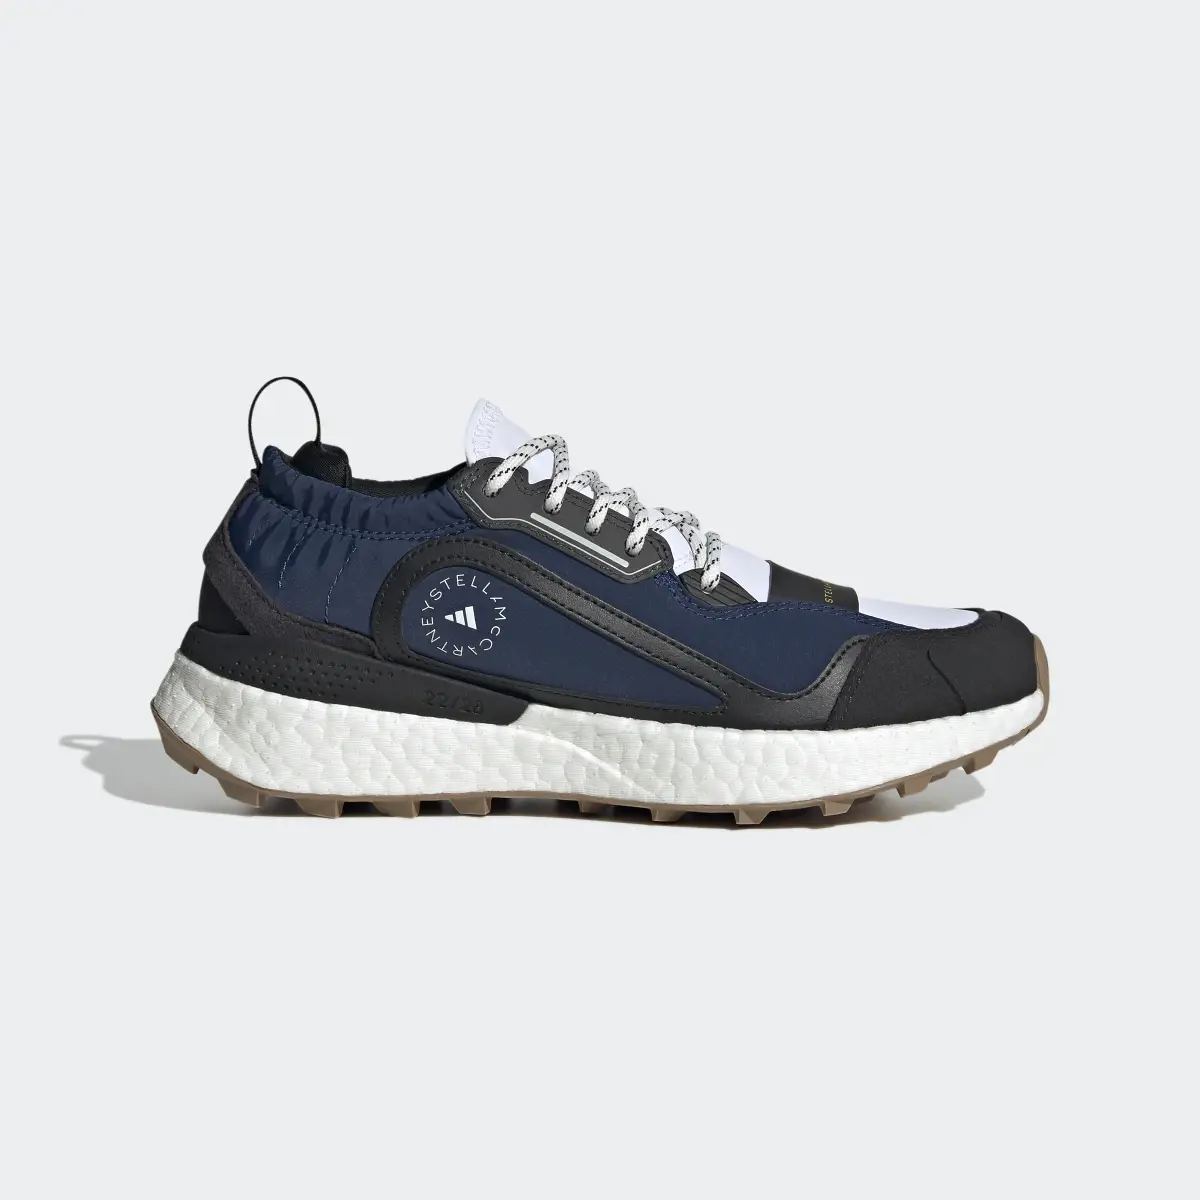 Adidas by Stella McCartney Outdoorboost 2.0 COLD.RDY Shoes. 2